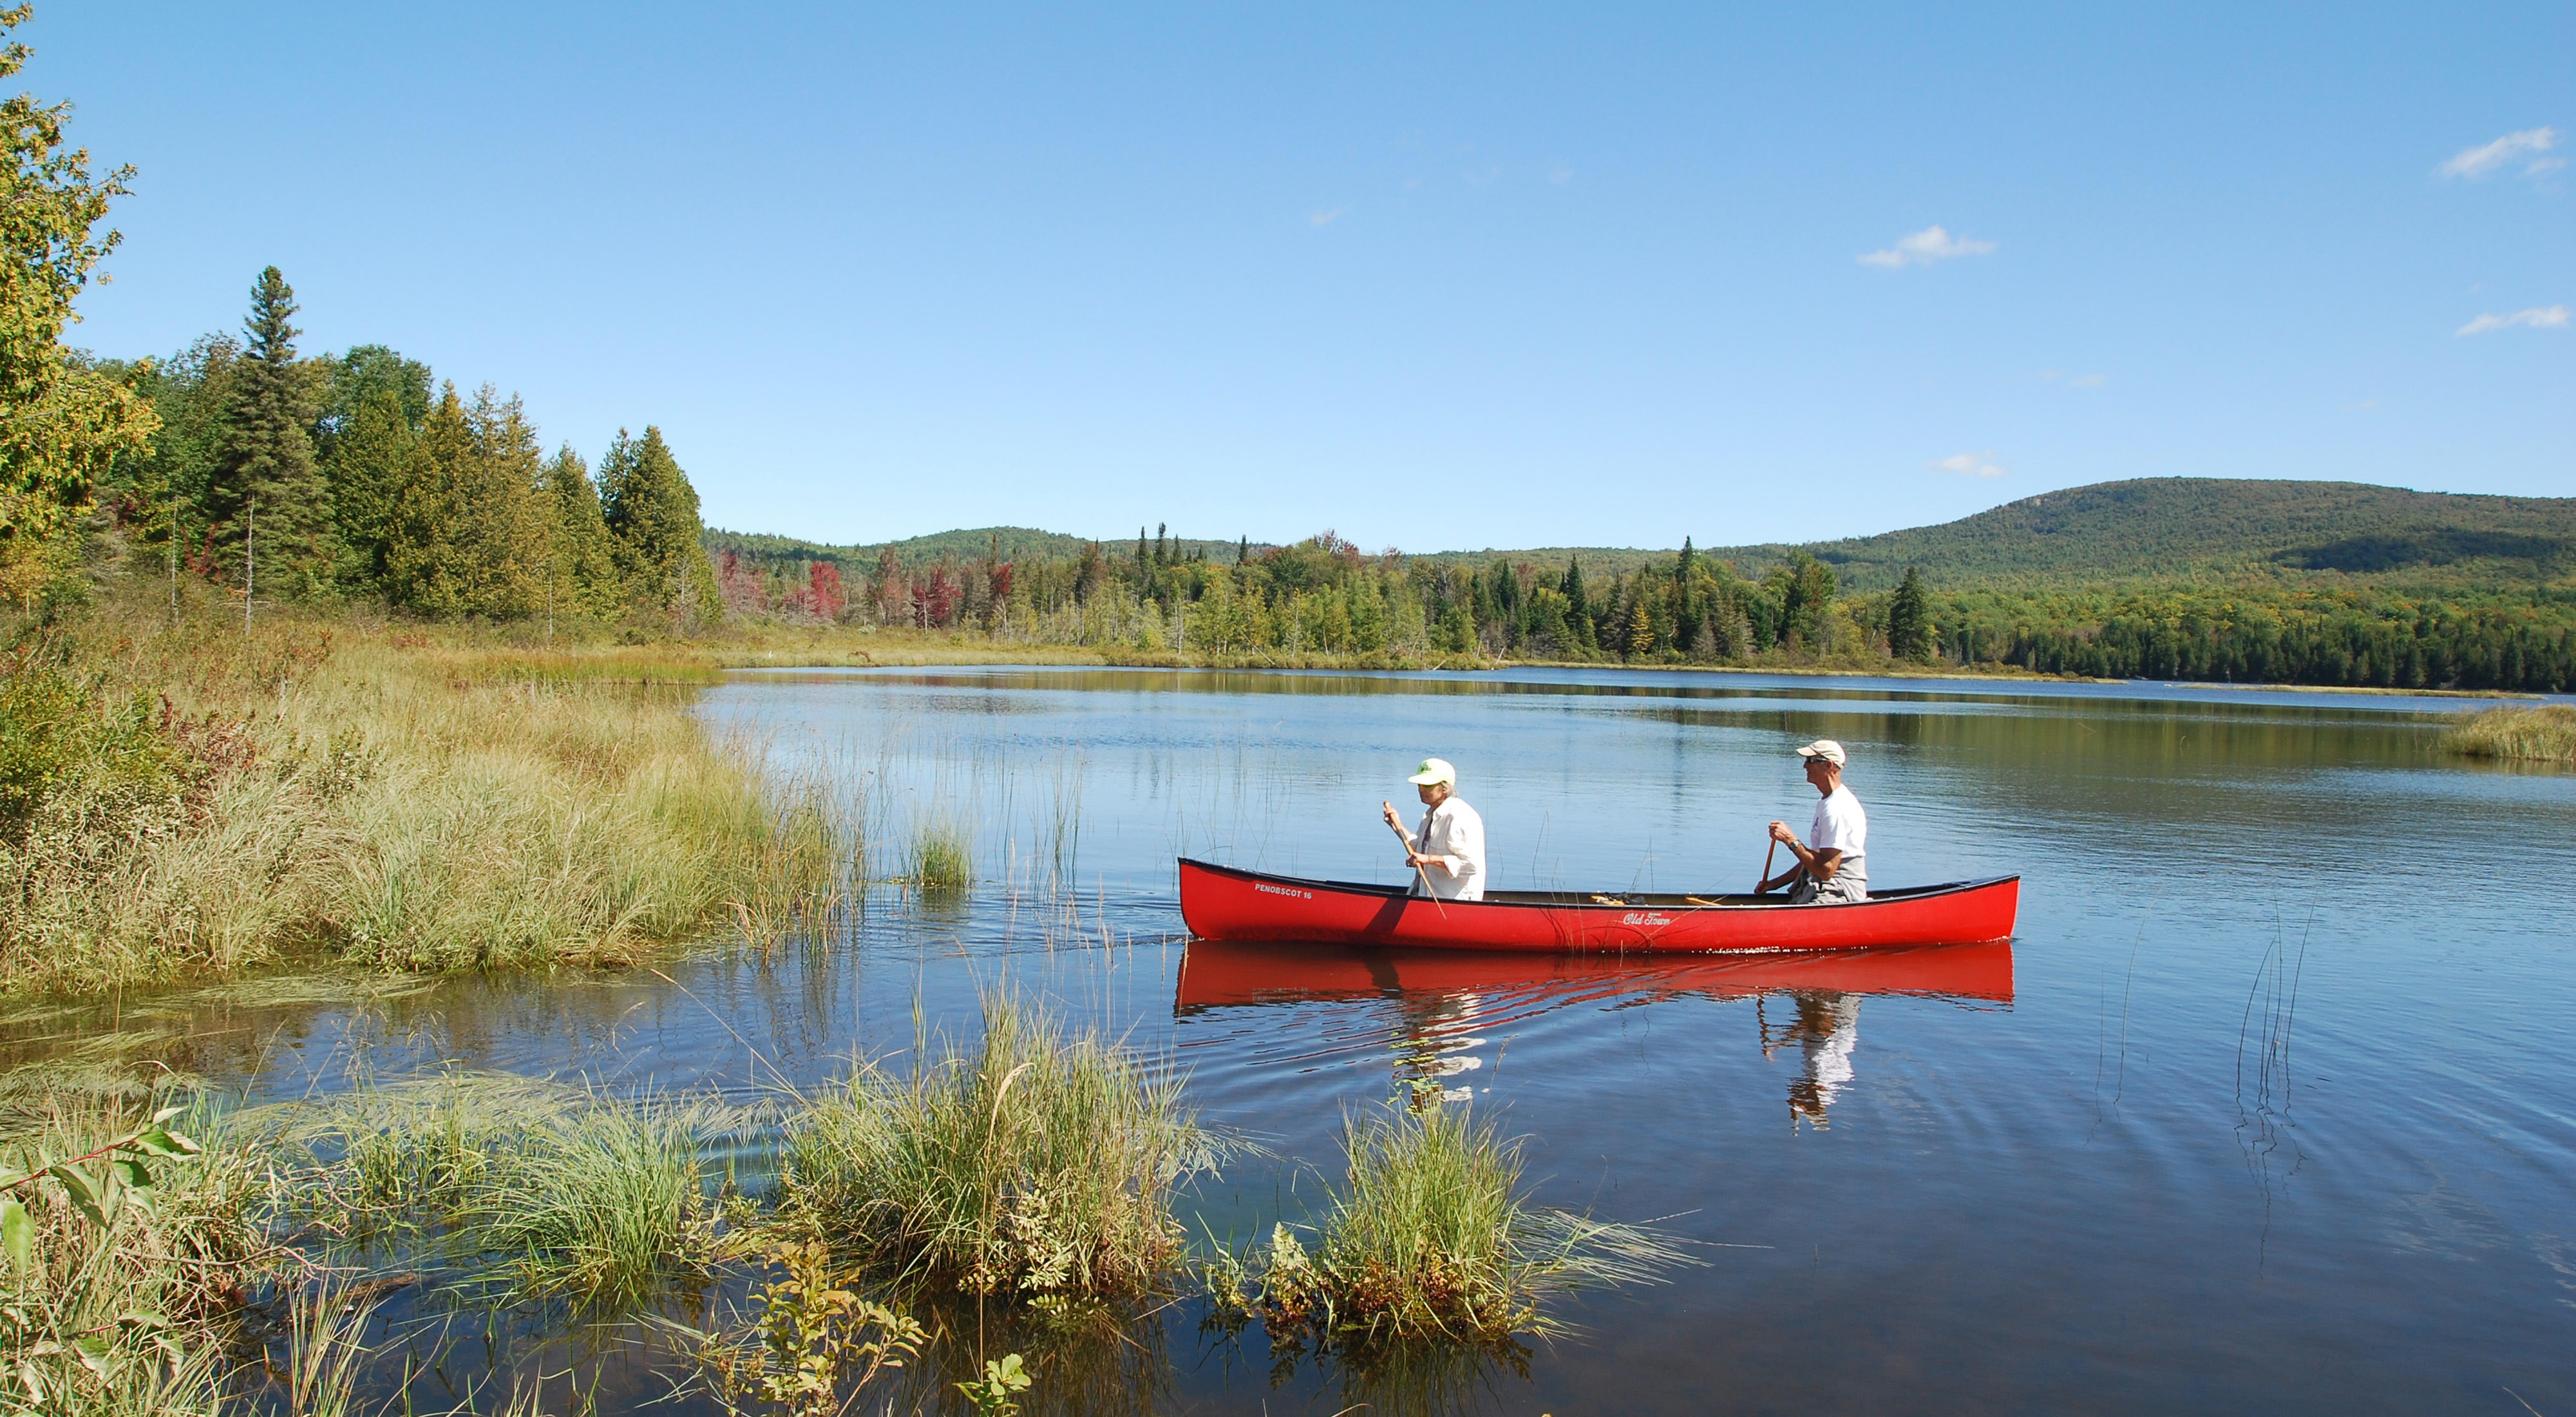 Two people paddle a red canoe on a pond with forested mountain slopes in the background.